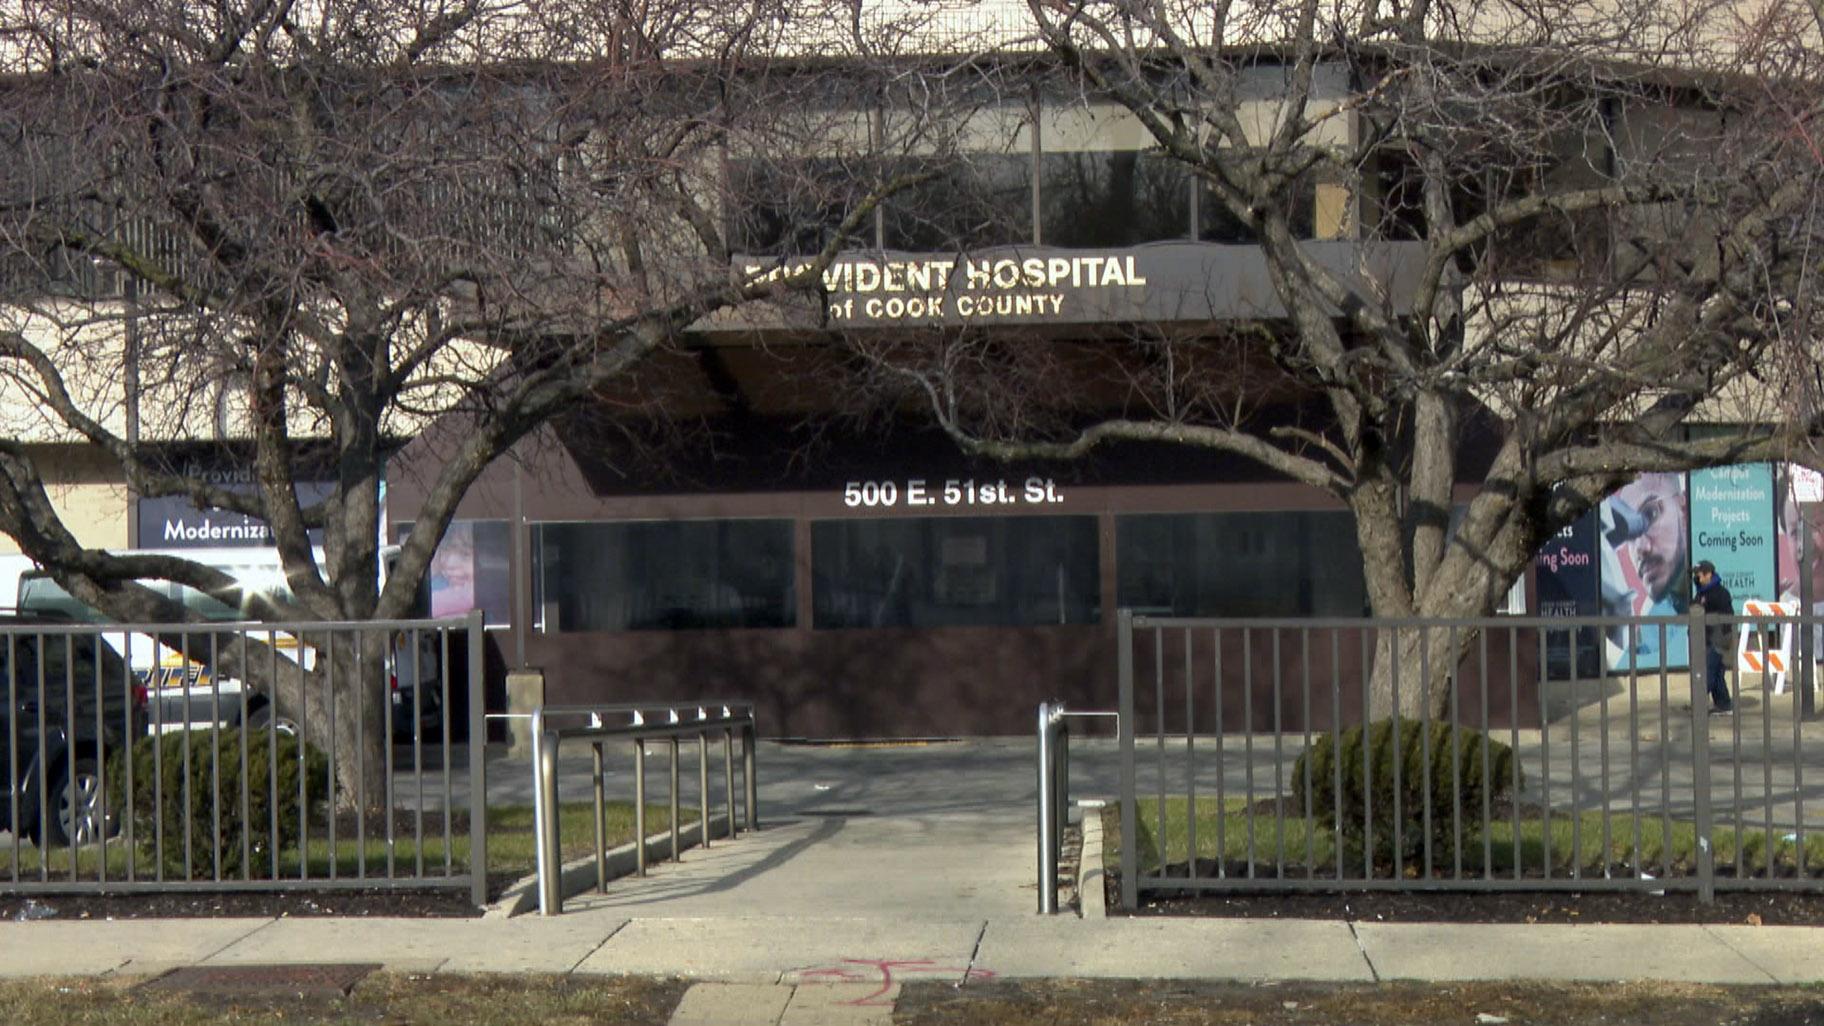 Provident Hospital in Cook County is where the nation's first open-heart surgery took place in 1893. (WTTW News)